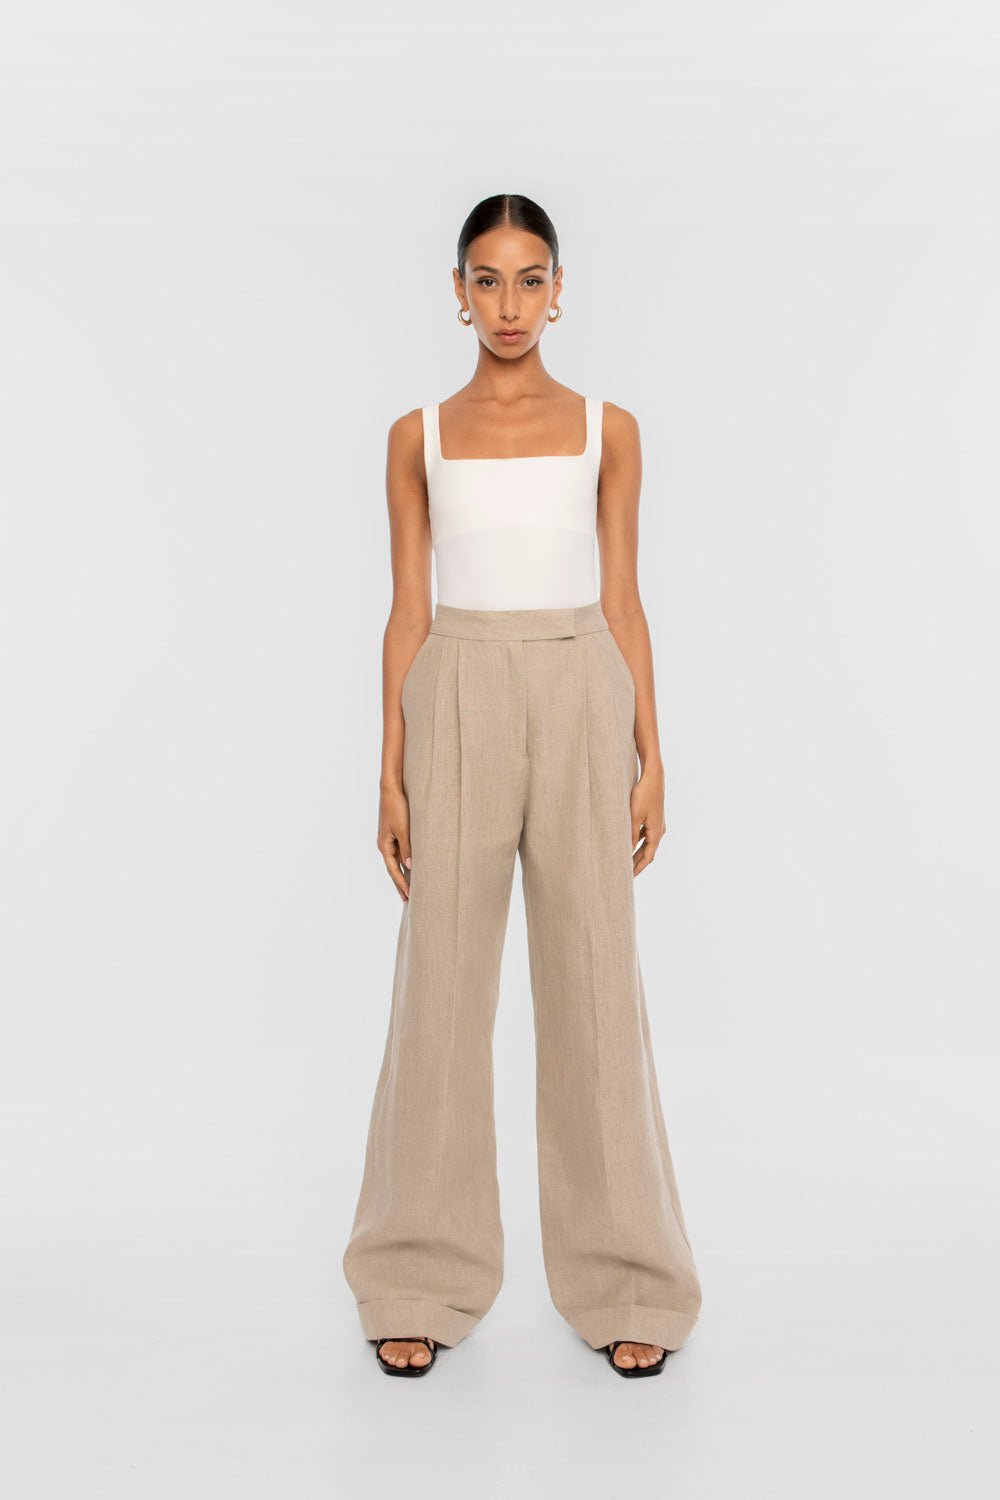 & OTHER STORIES Relaxed High Waist Linen Trousers in Beige | Endource